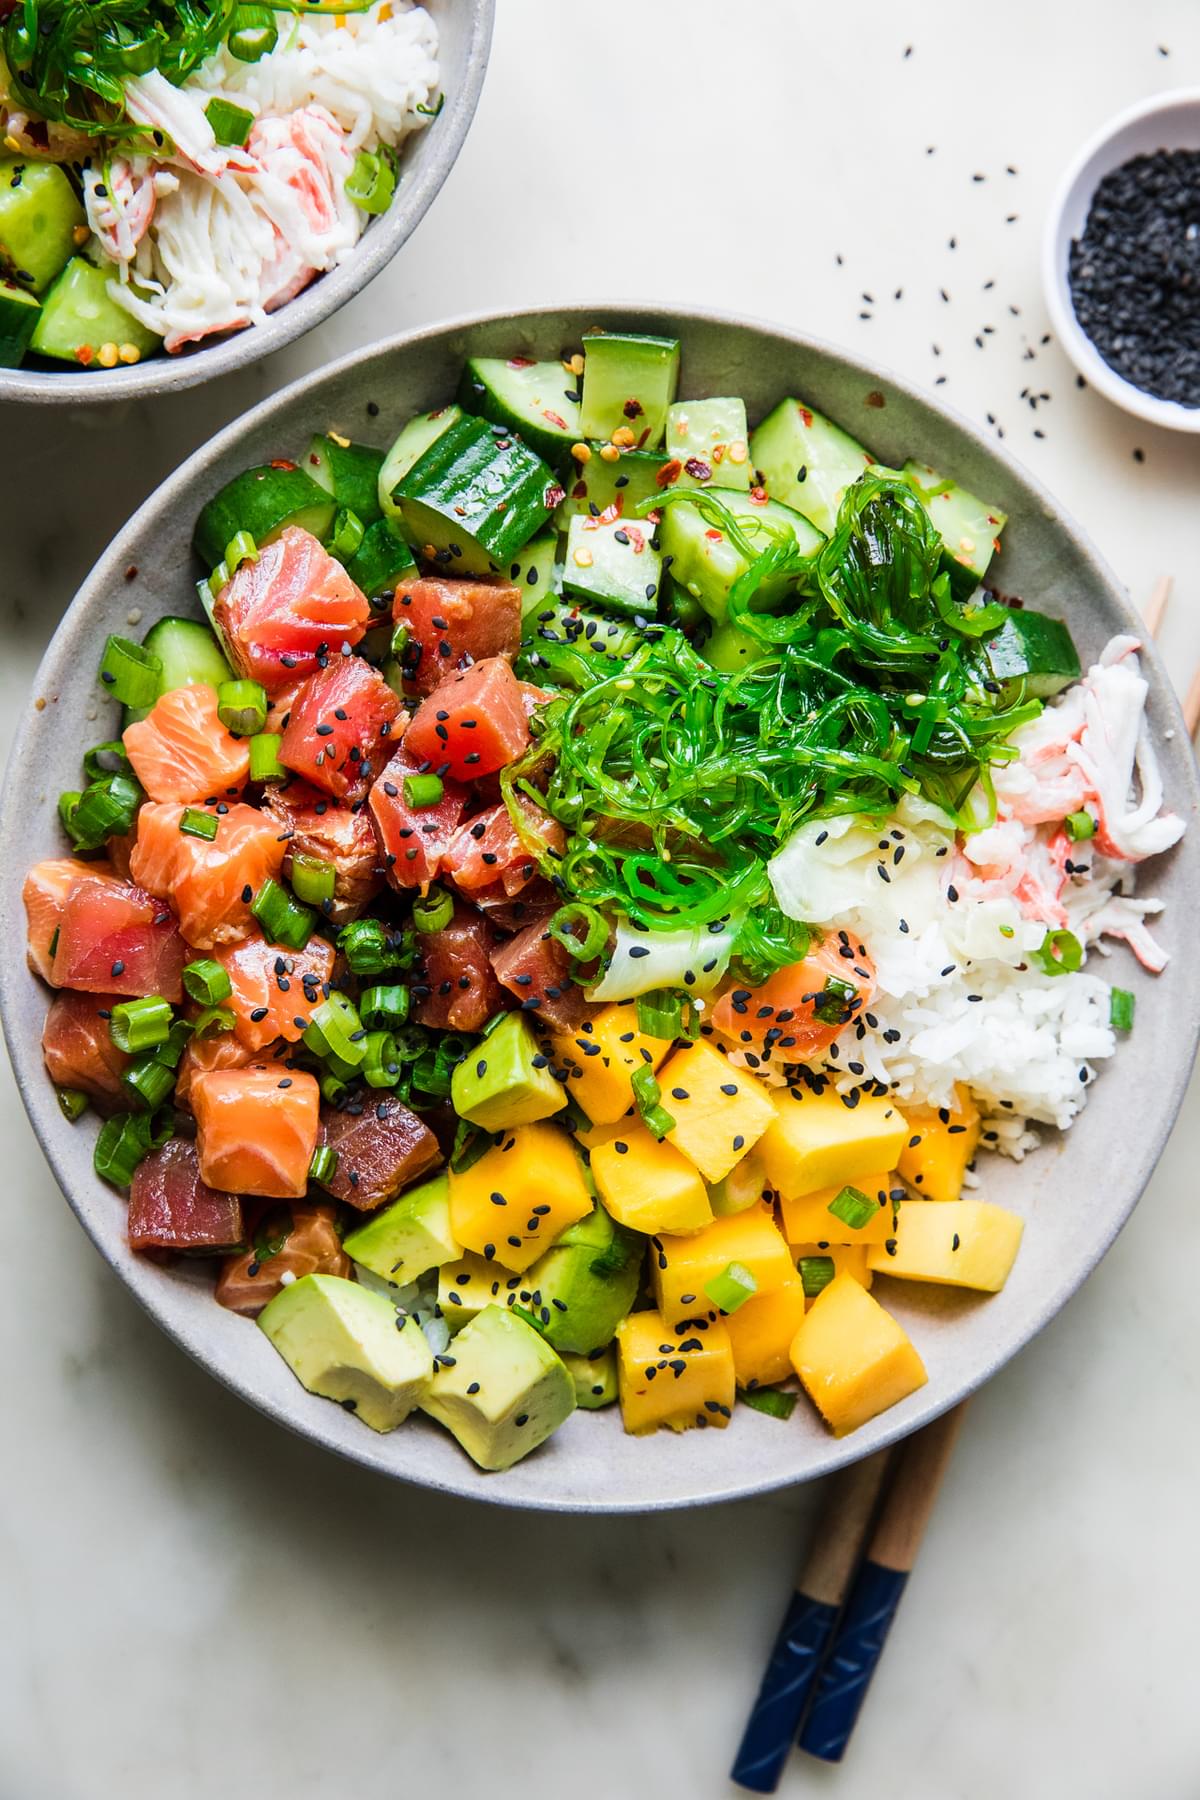 homemade poke bowl recipe with tuna, salmon, mango, cucumber and rice topped with crab, avocado and seaweed in a bowl